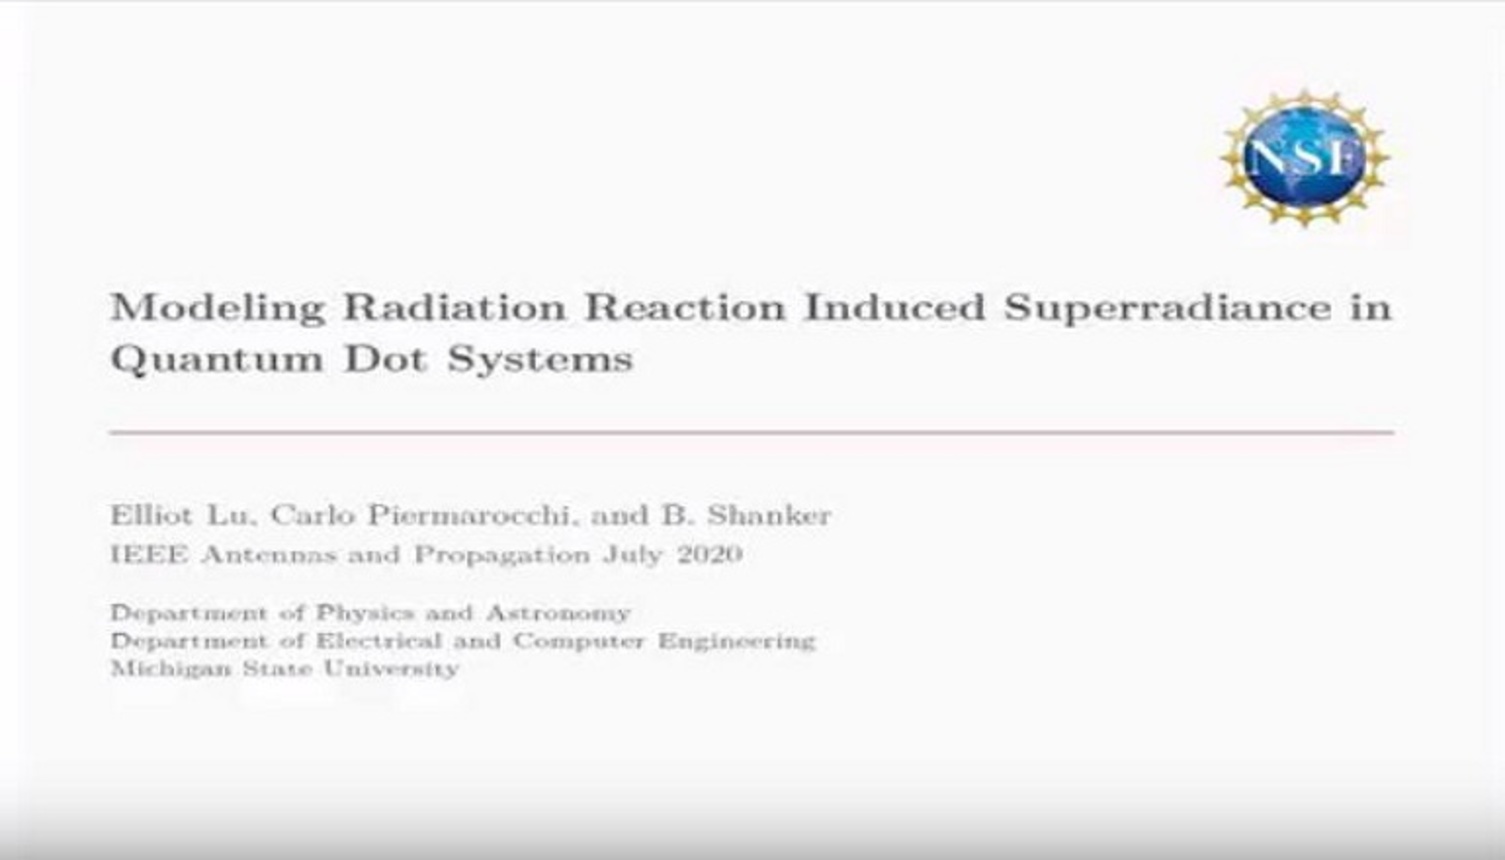 Modeling Radiation Reaction Induced Superradiance in Quantum Dot Systems Video